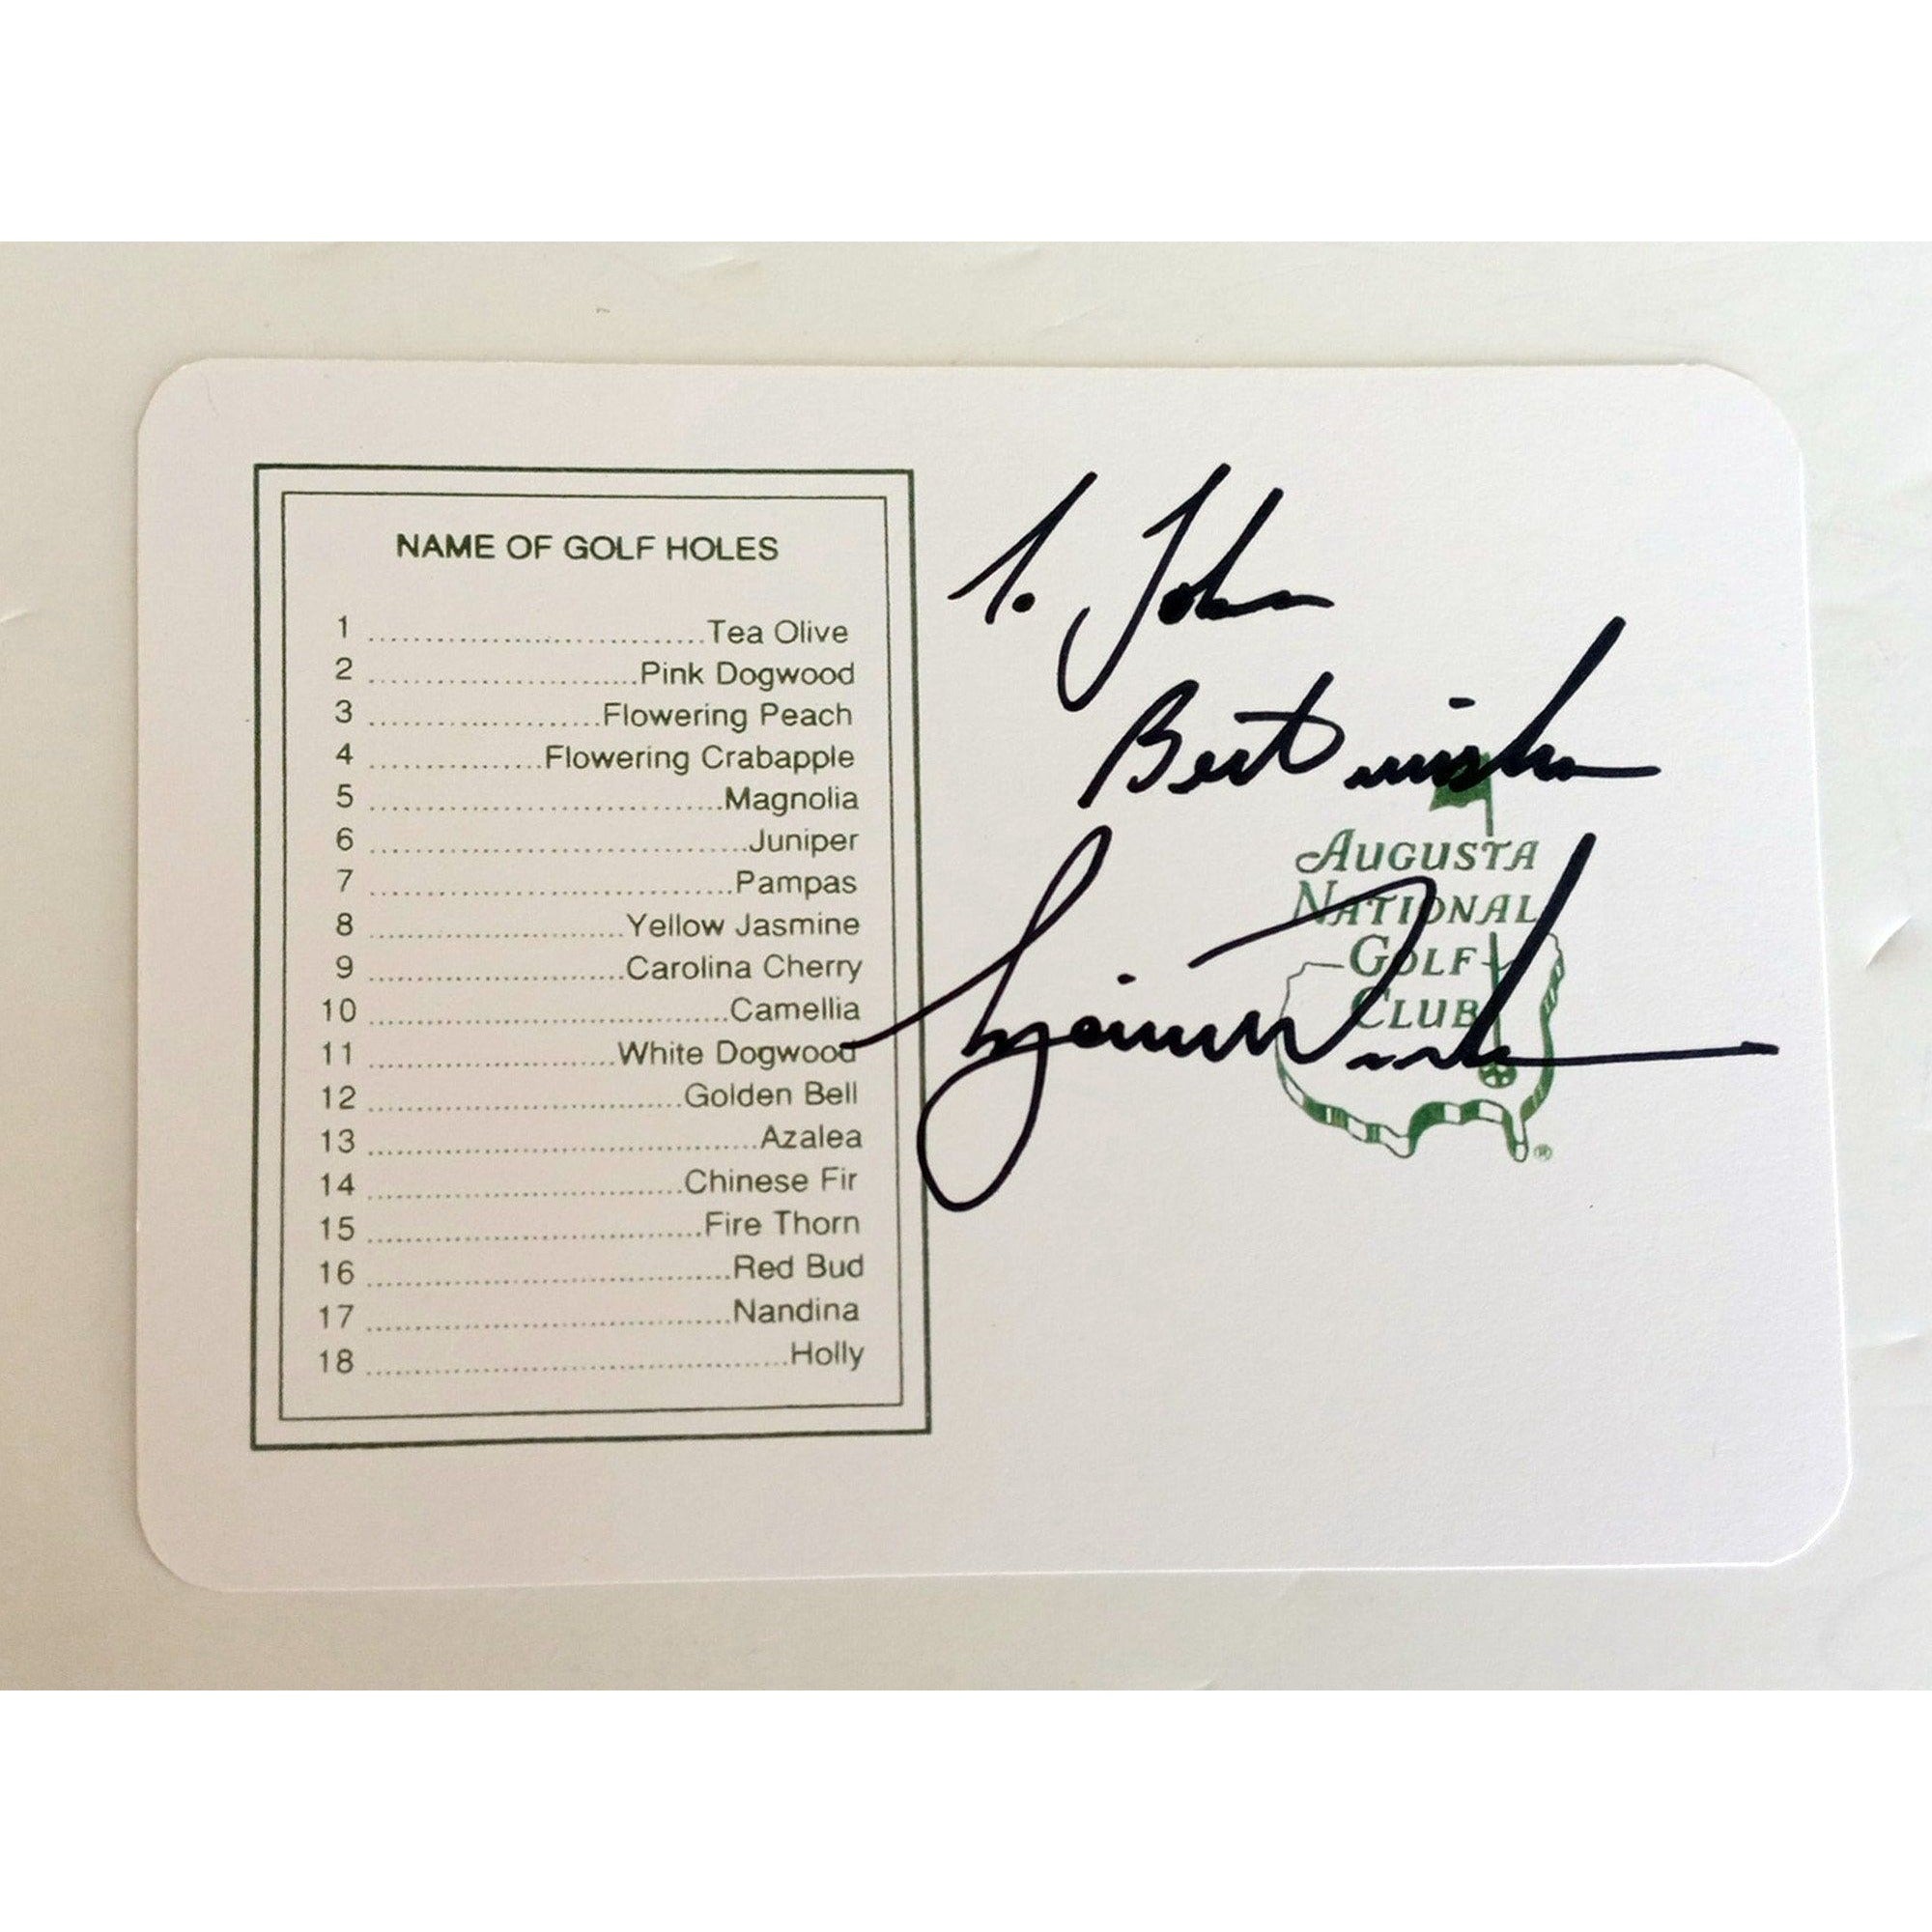 Tiger Woods Masters scorecard personalized signed to John with proof